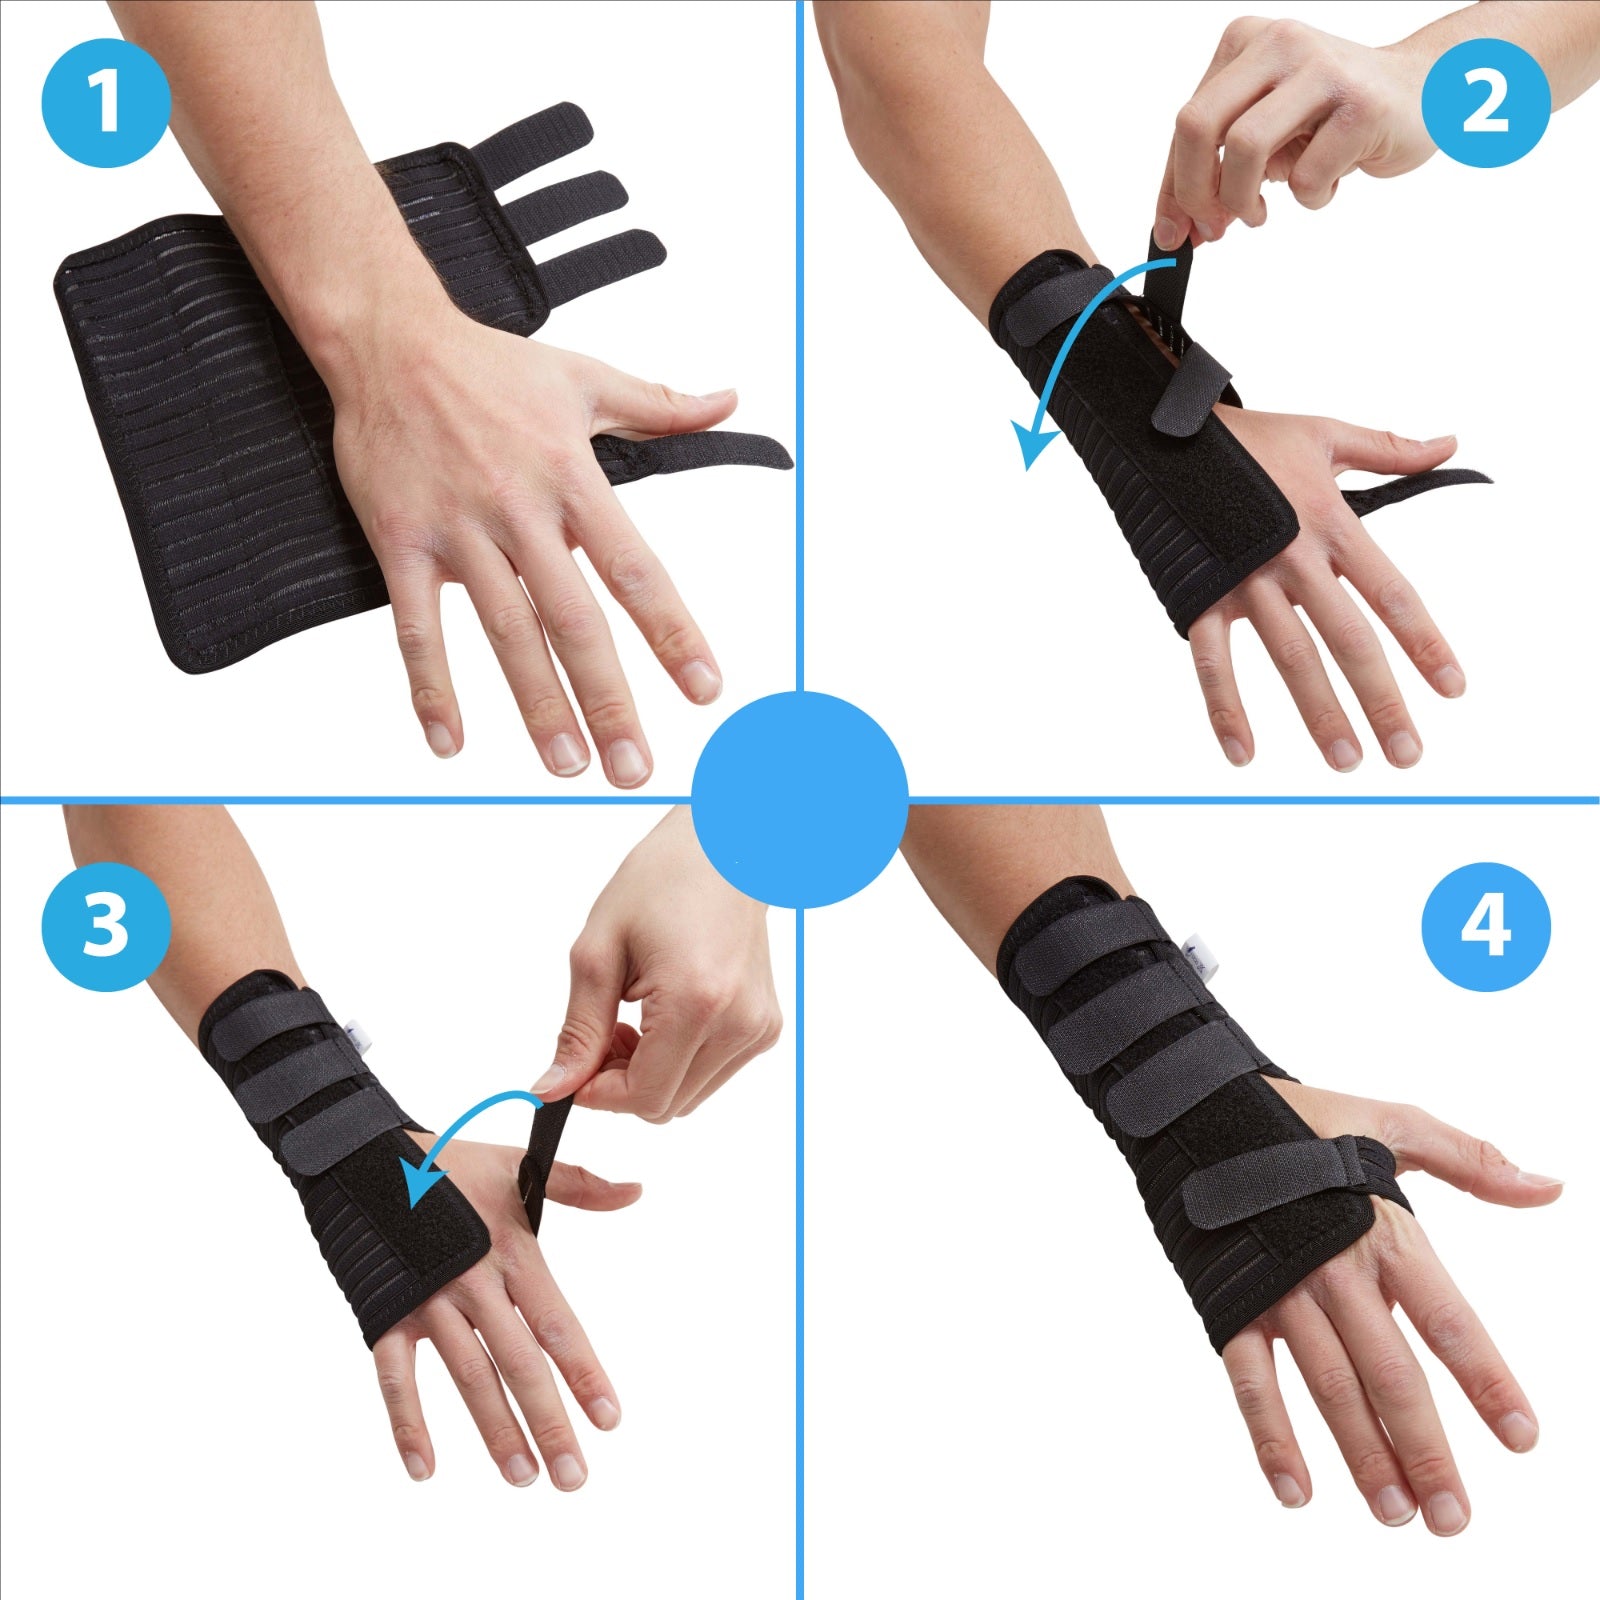  MySplint Custom Fit Wrist Splint, Moldable Thermoplastic Wrist  Brace for Strains, Sprains, Carpal Tunnel and More, One Size : Health &  Household